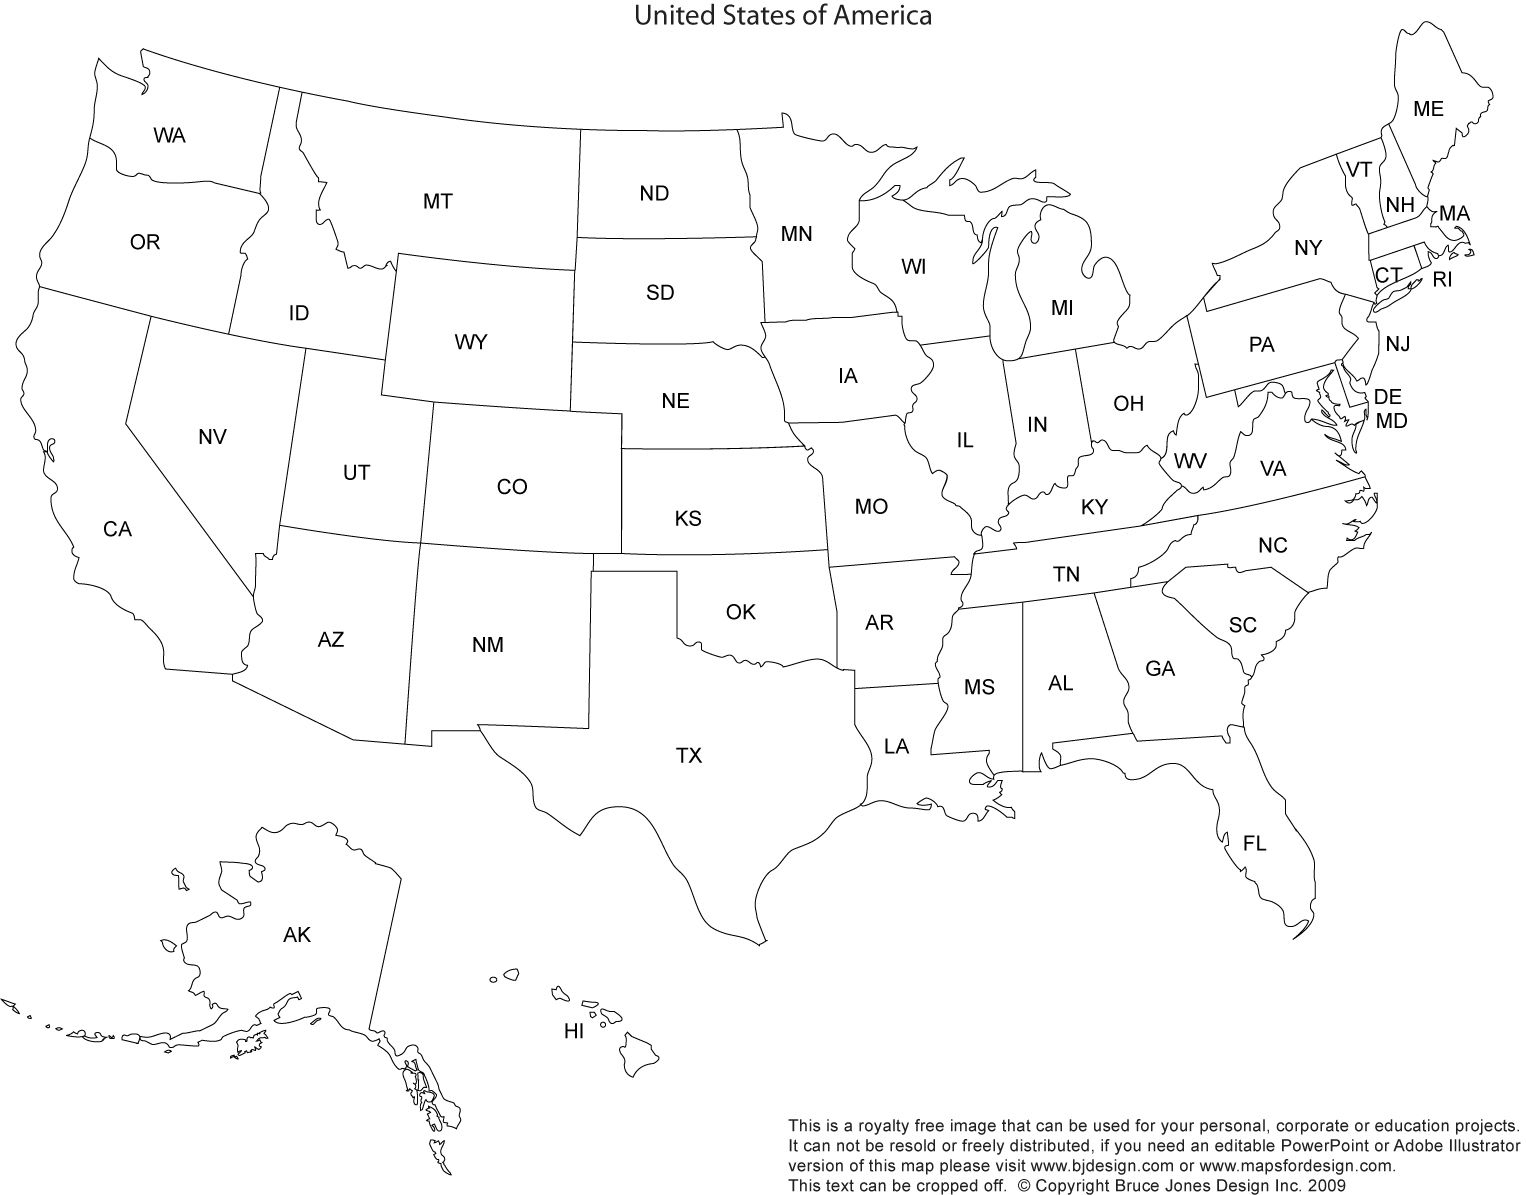 Print Out A Blank Map Of The Us And Have The Kids Color In States - Free Printable Map Of The United States